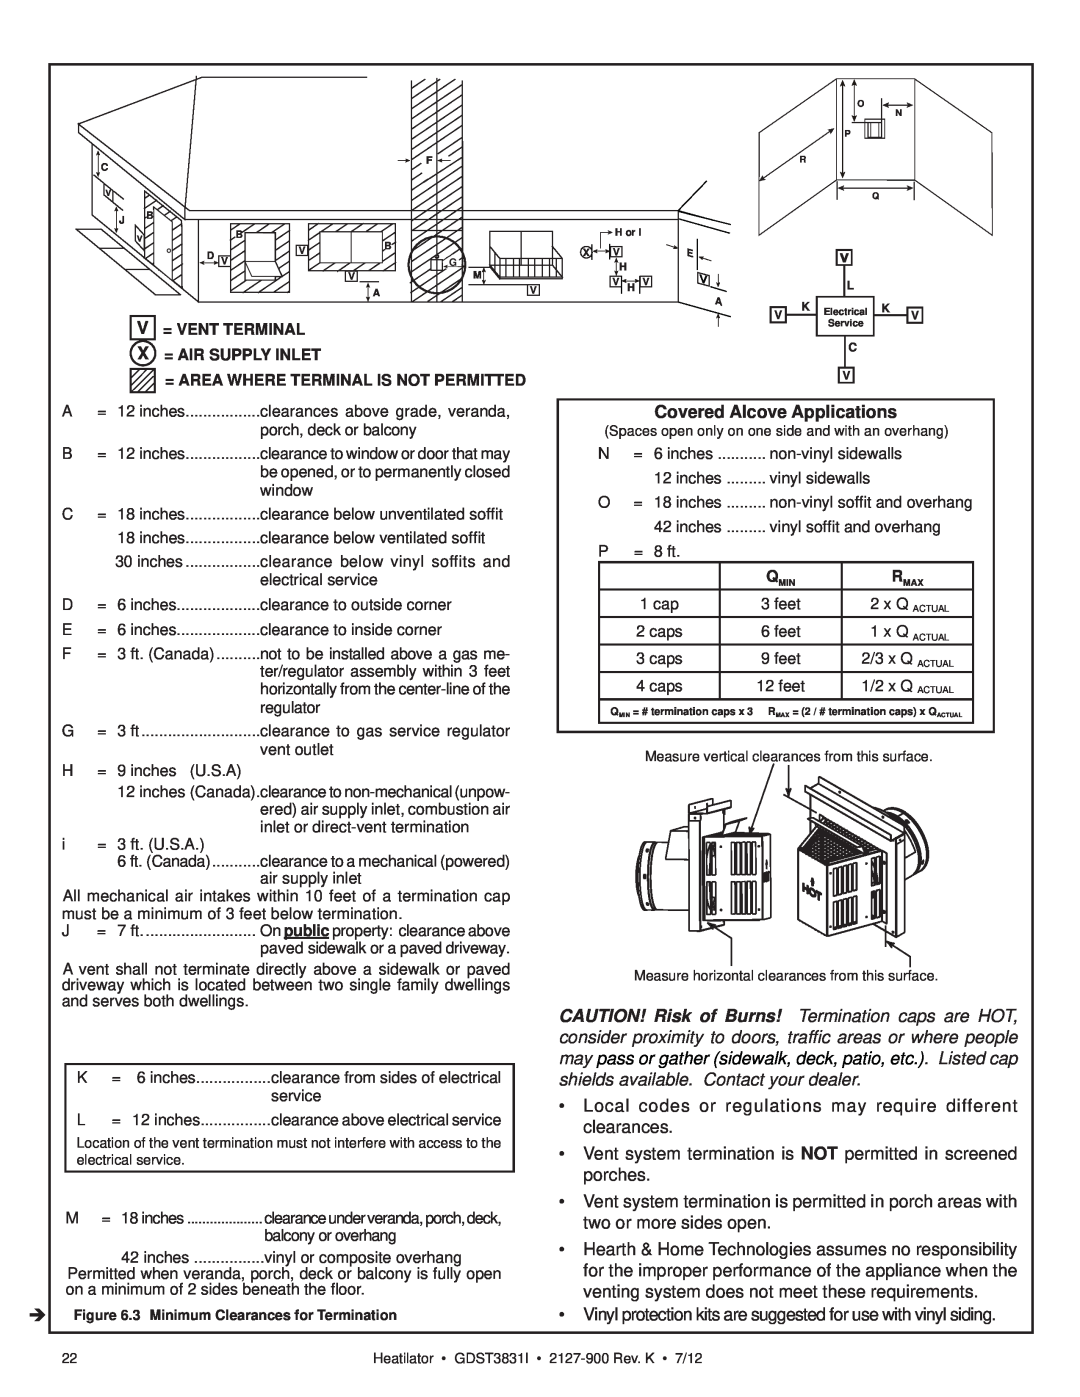 Heatiator GDST3831I owner manual Covered Alcove Applications, V= Vent Terminal X = Air Supply Inlet 